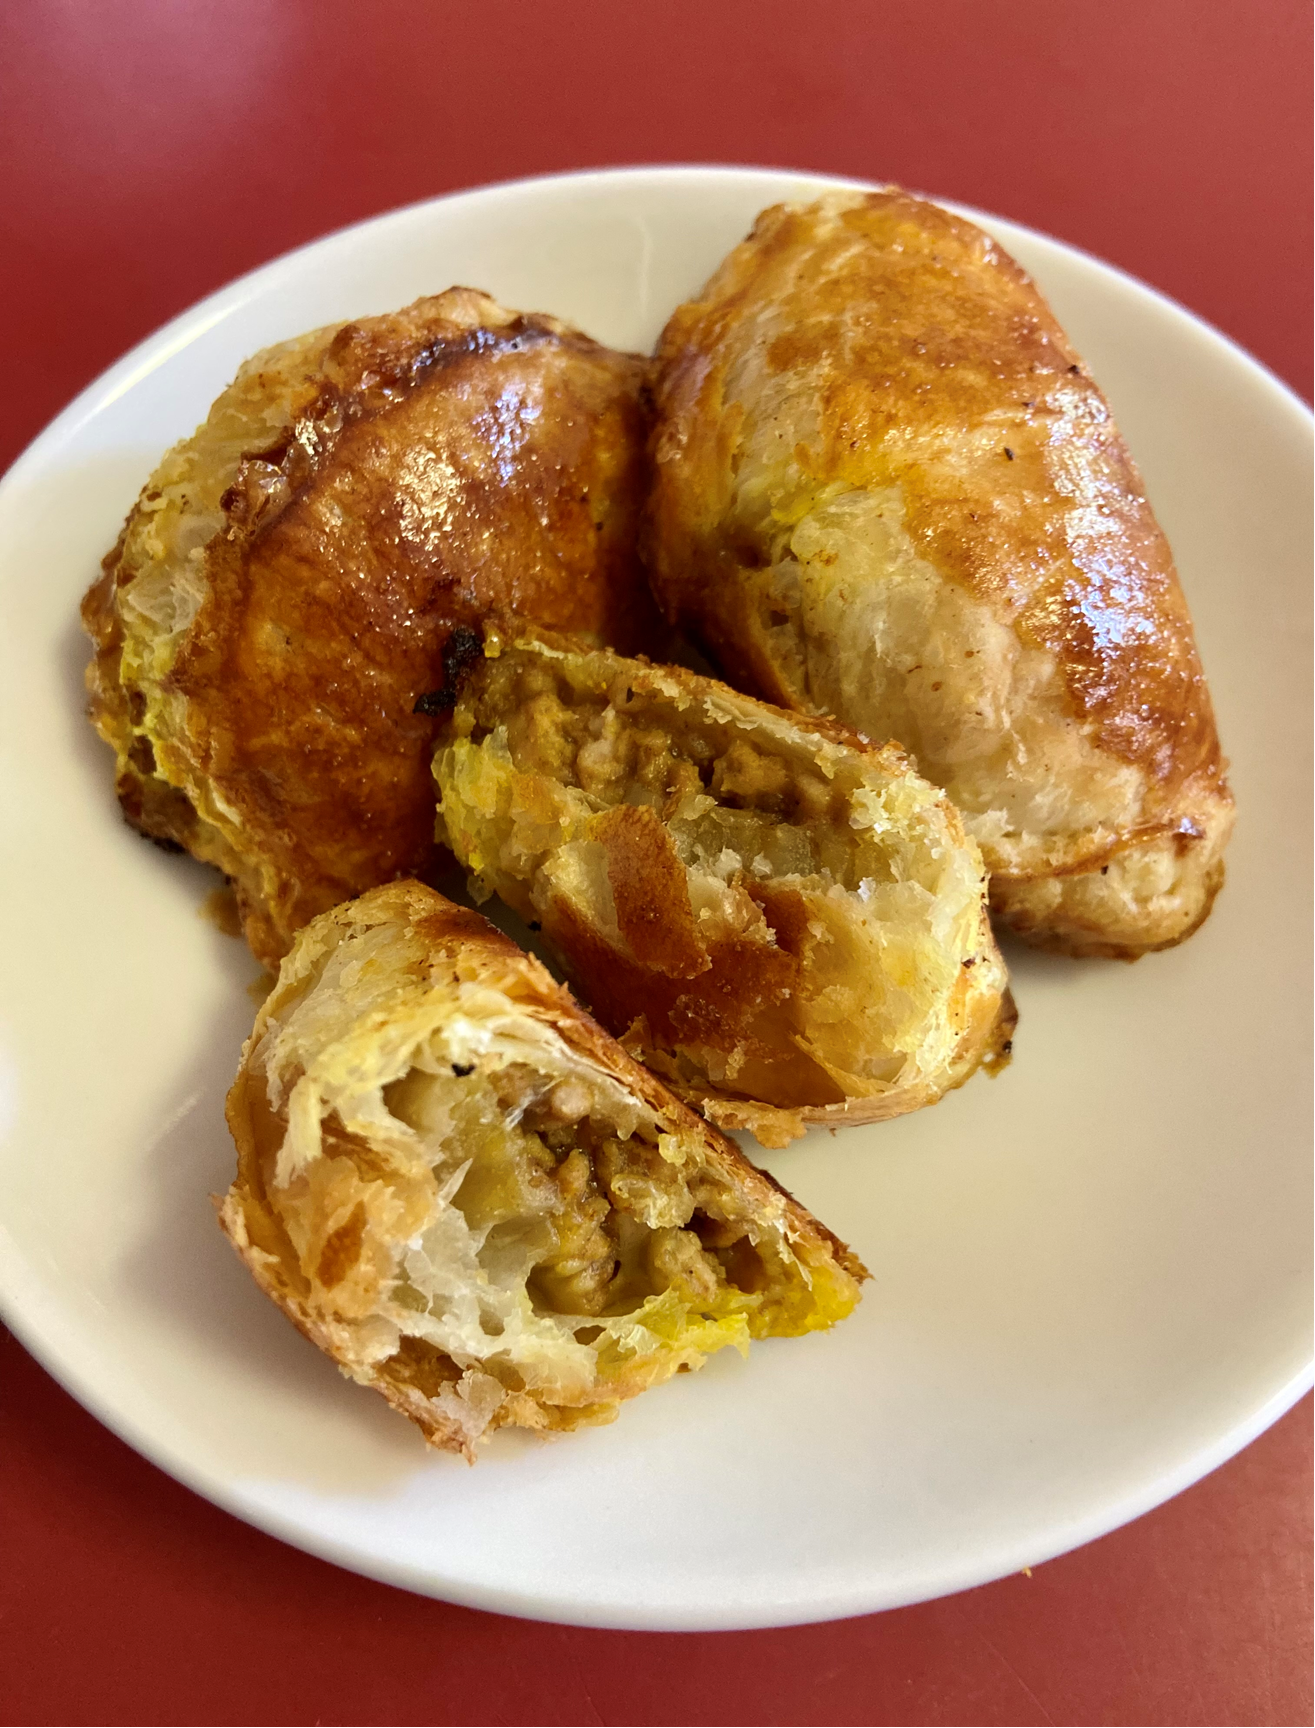 A plate of curry puff pastries.